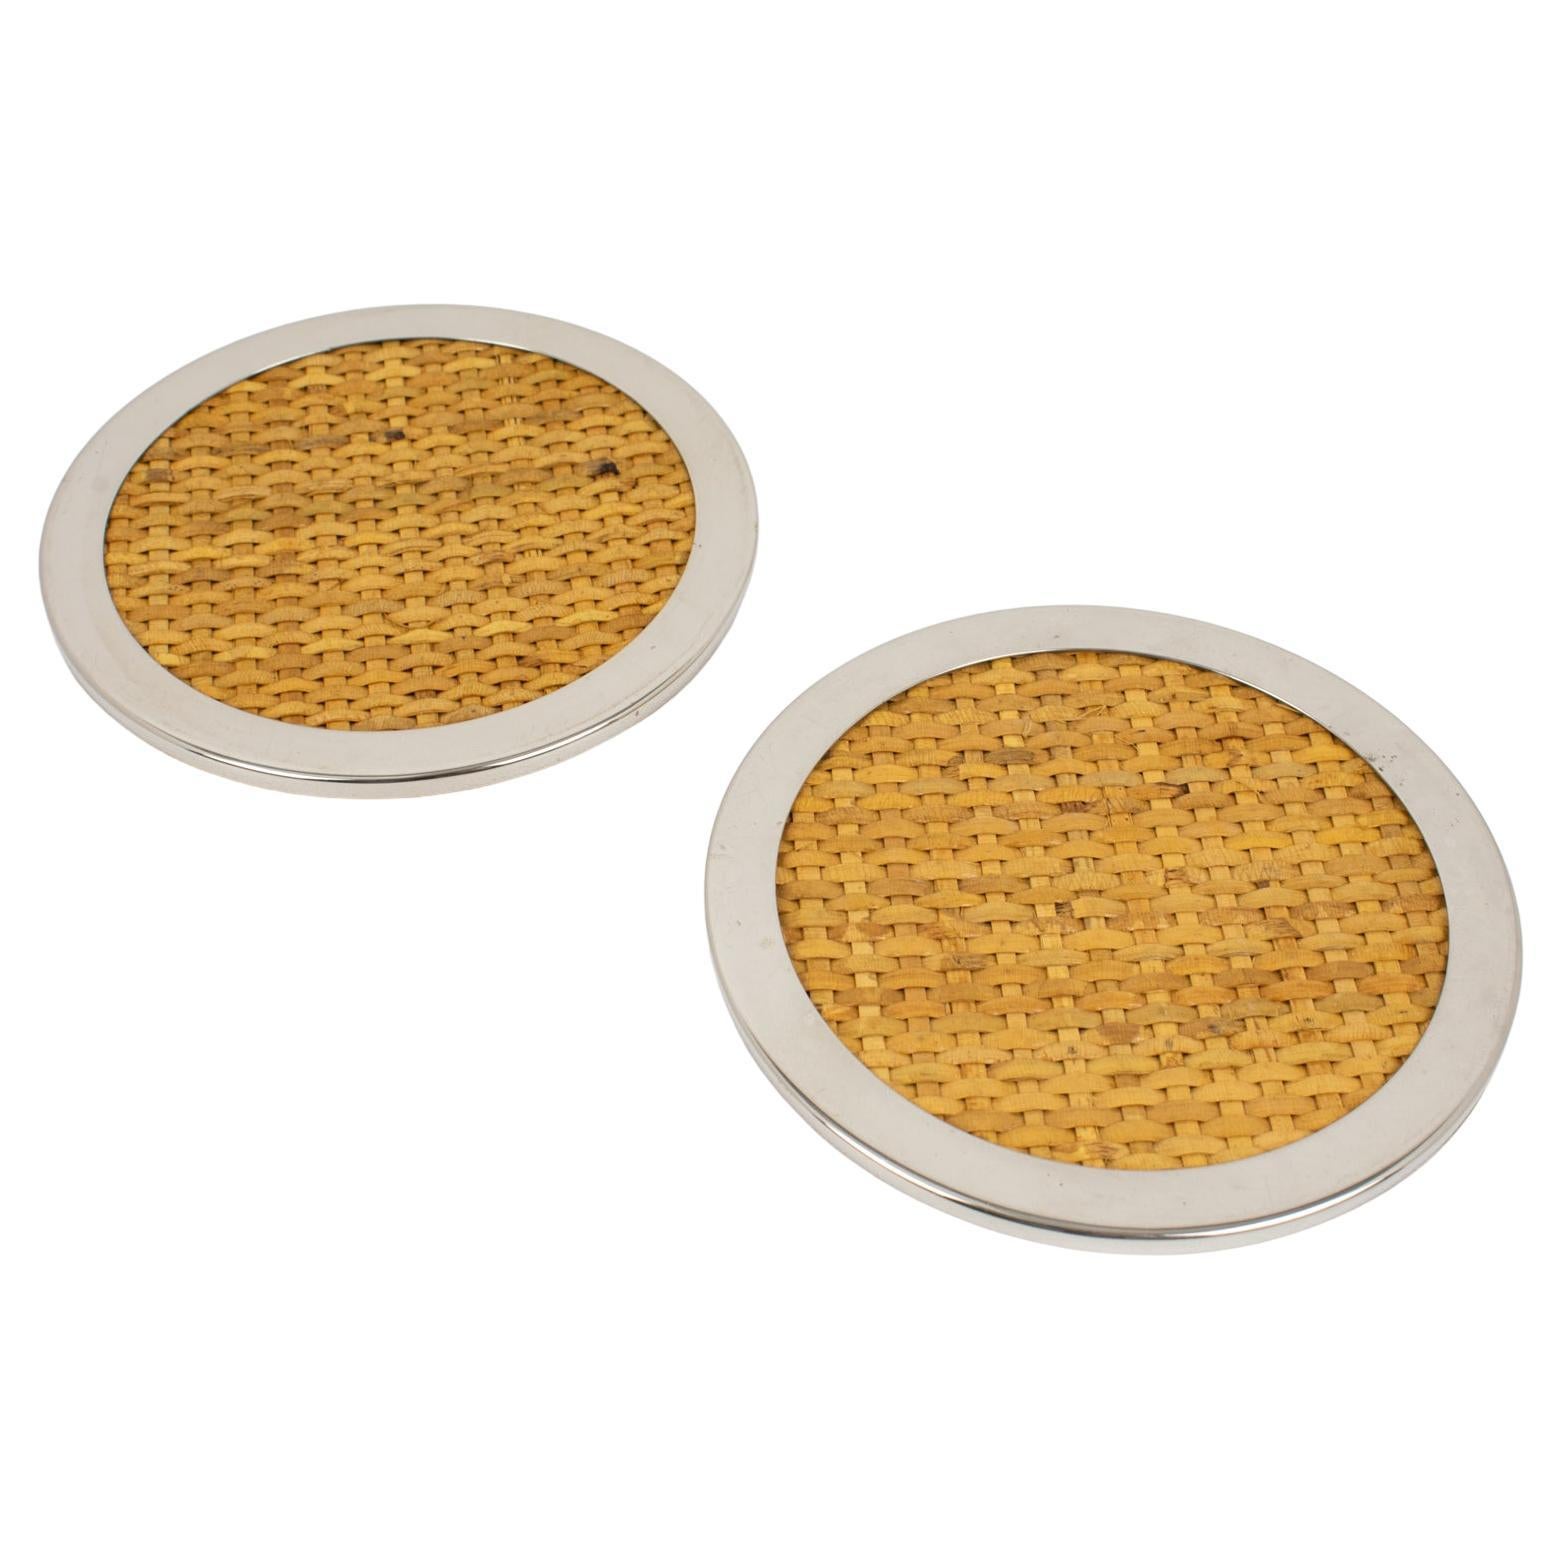 Tommaso Barbi Wicker and Chrome Set of Two Coasters, 1970s For Sale